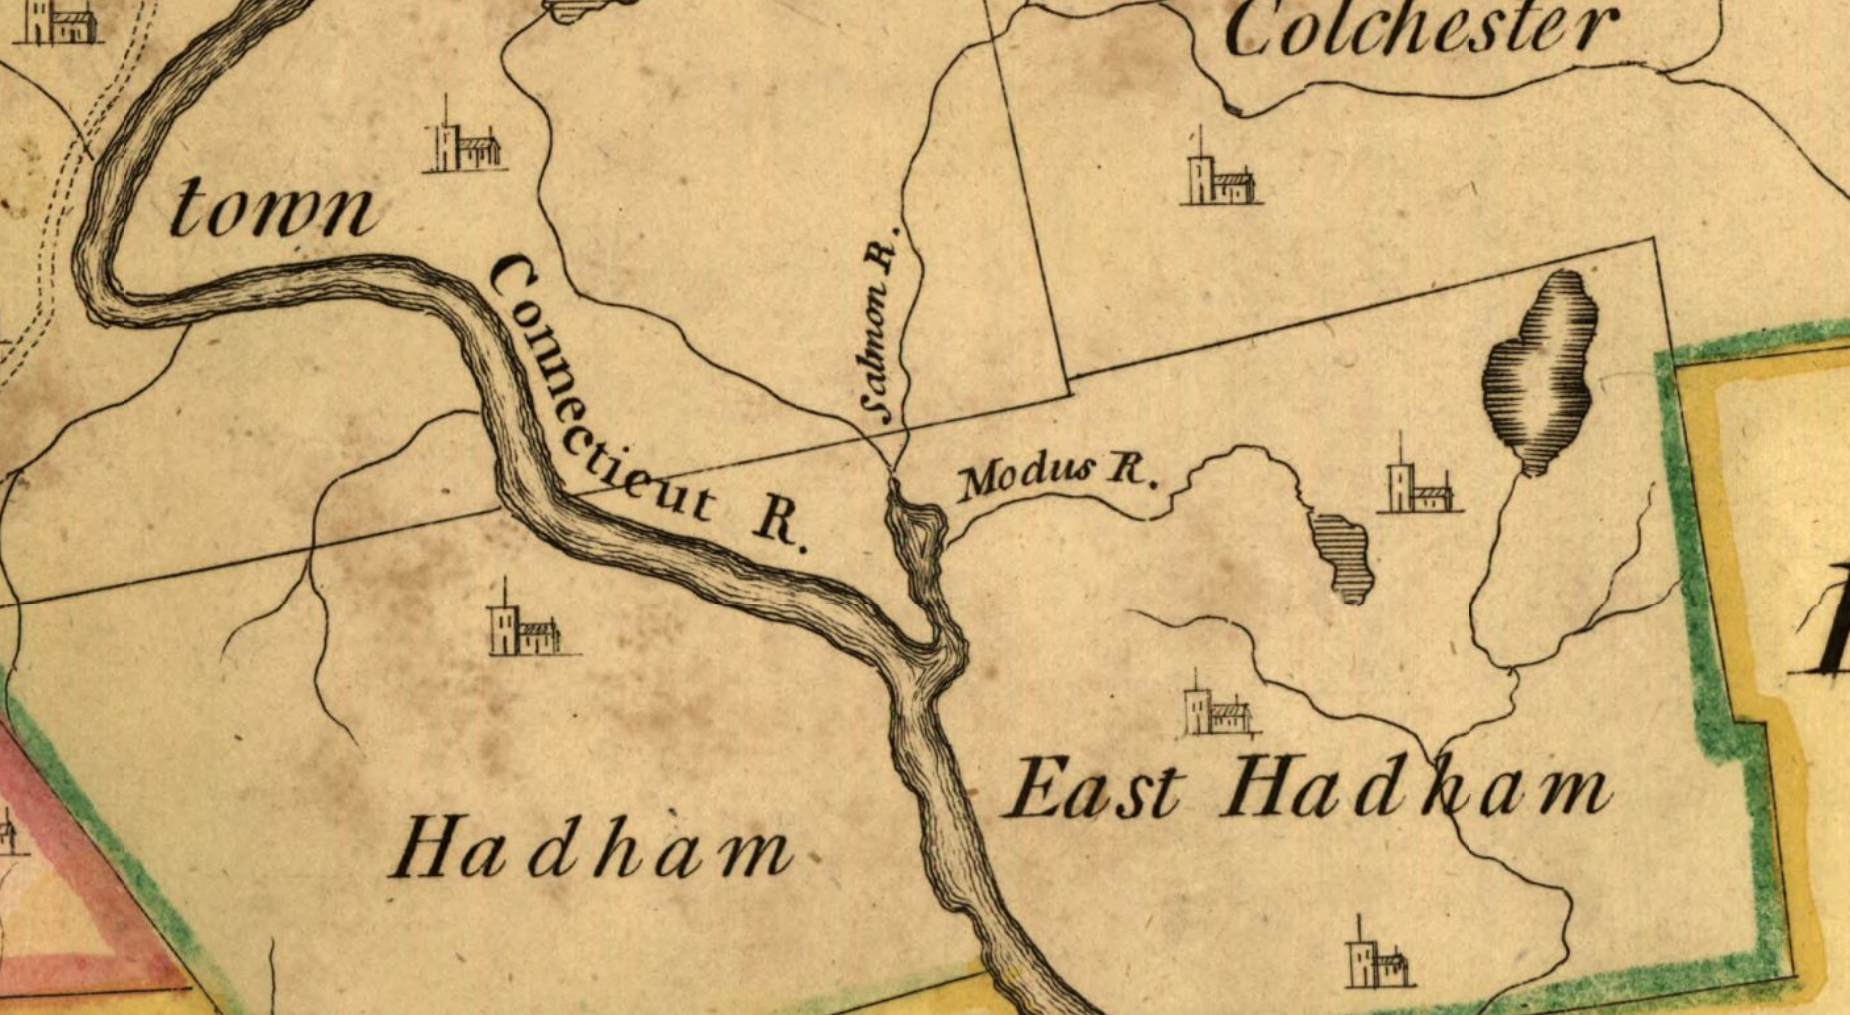 18th century map showing two main rivers with town names, but mostly empty, on brown paper